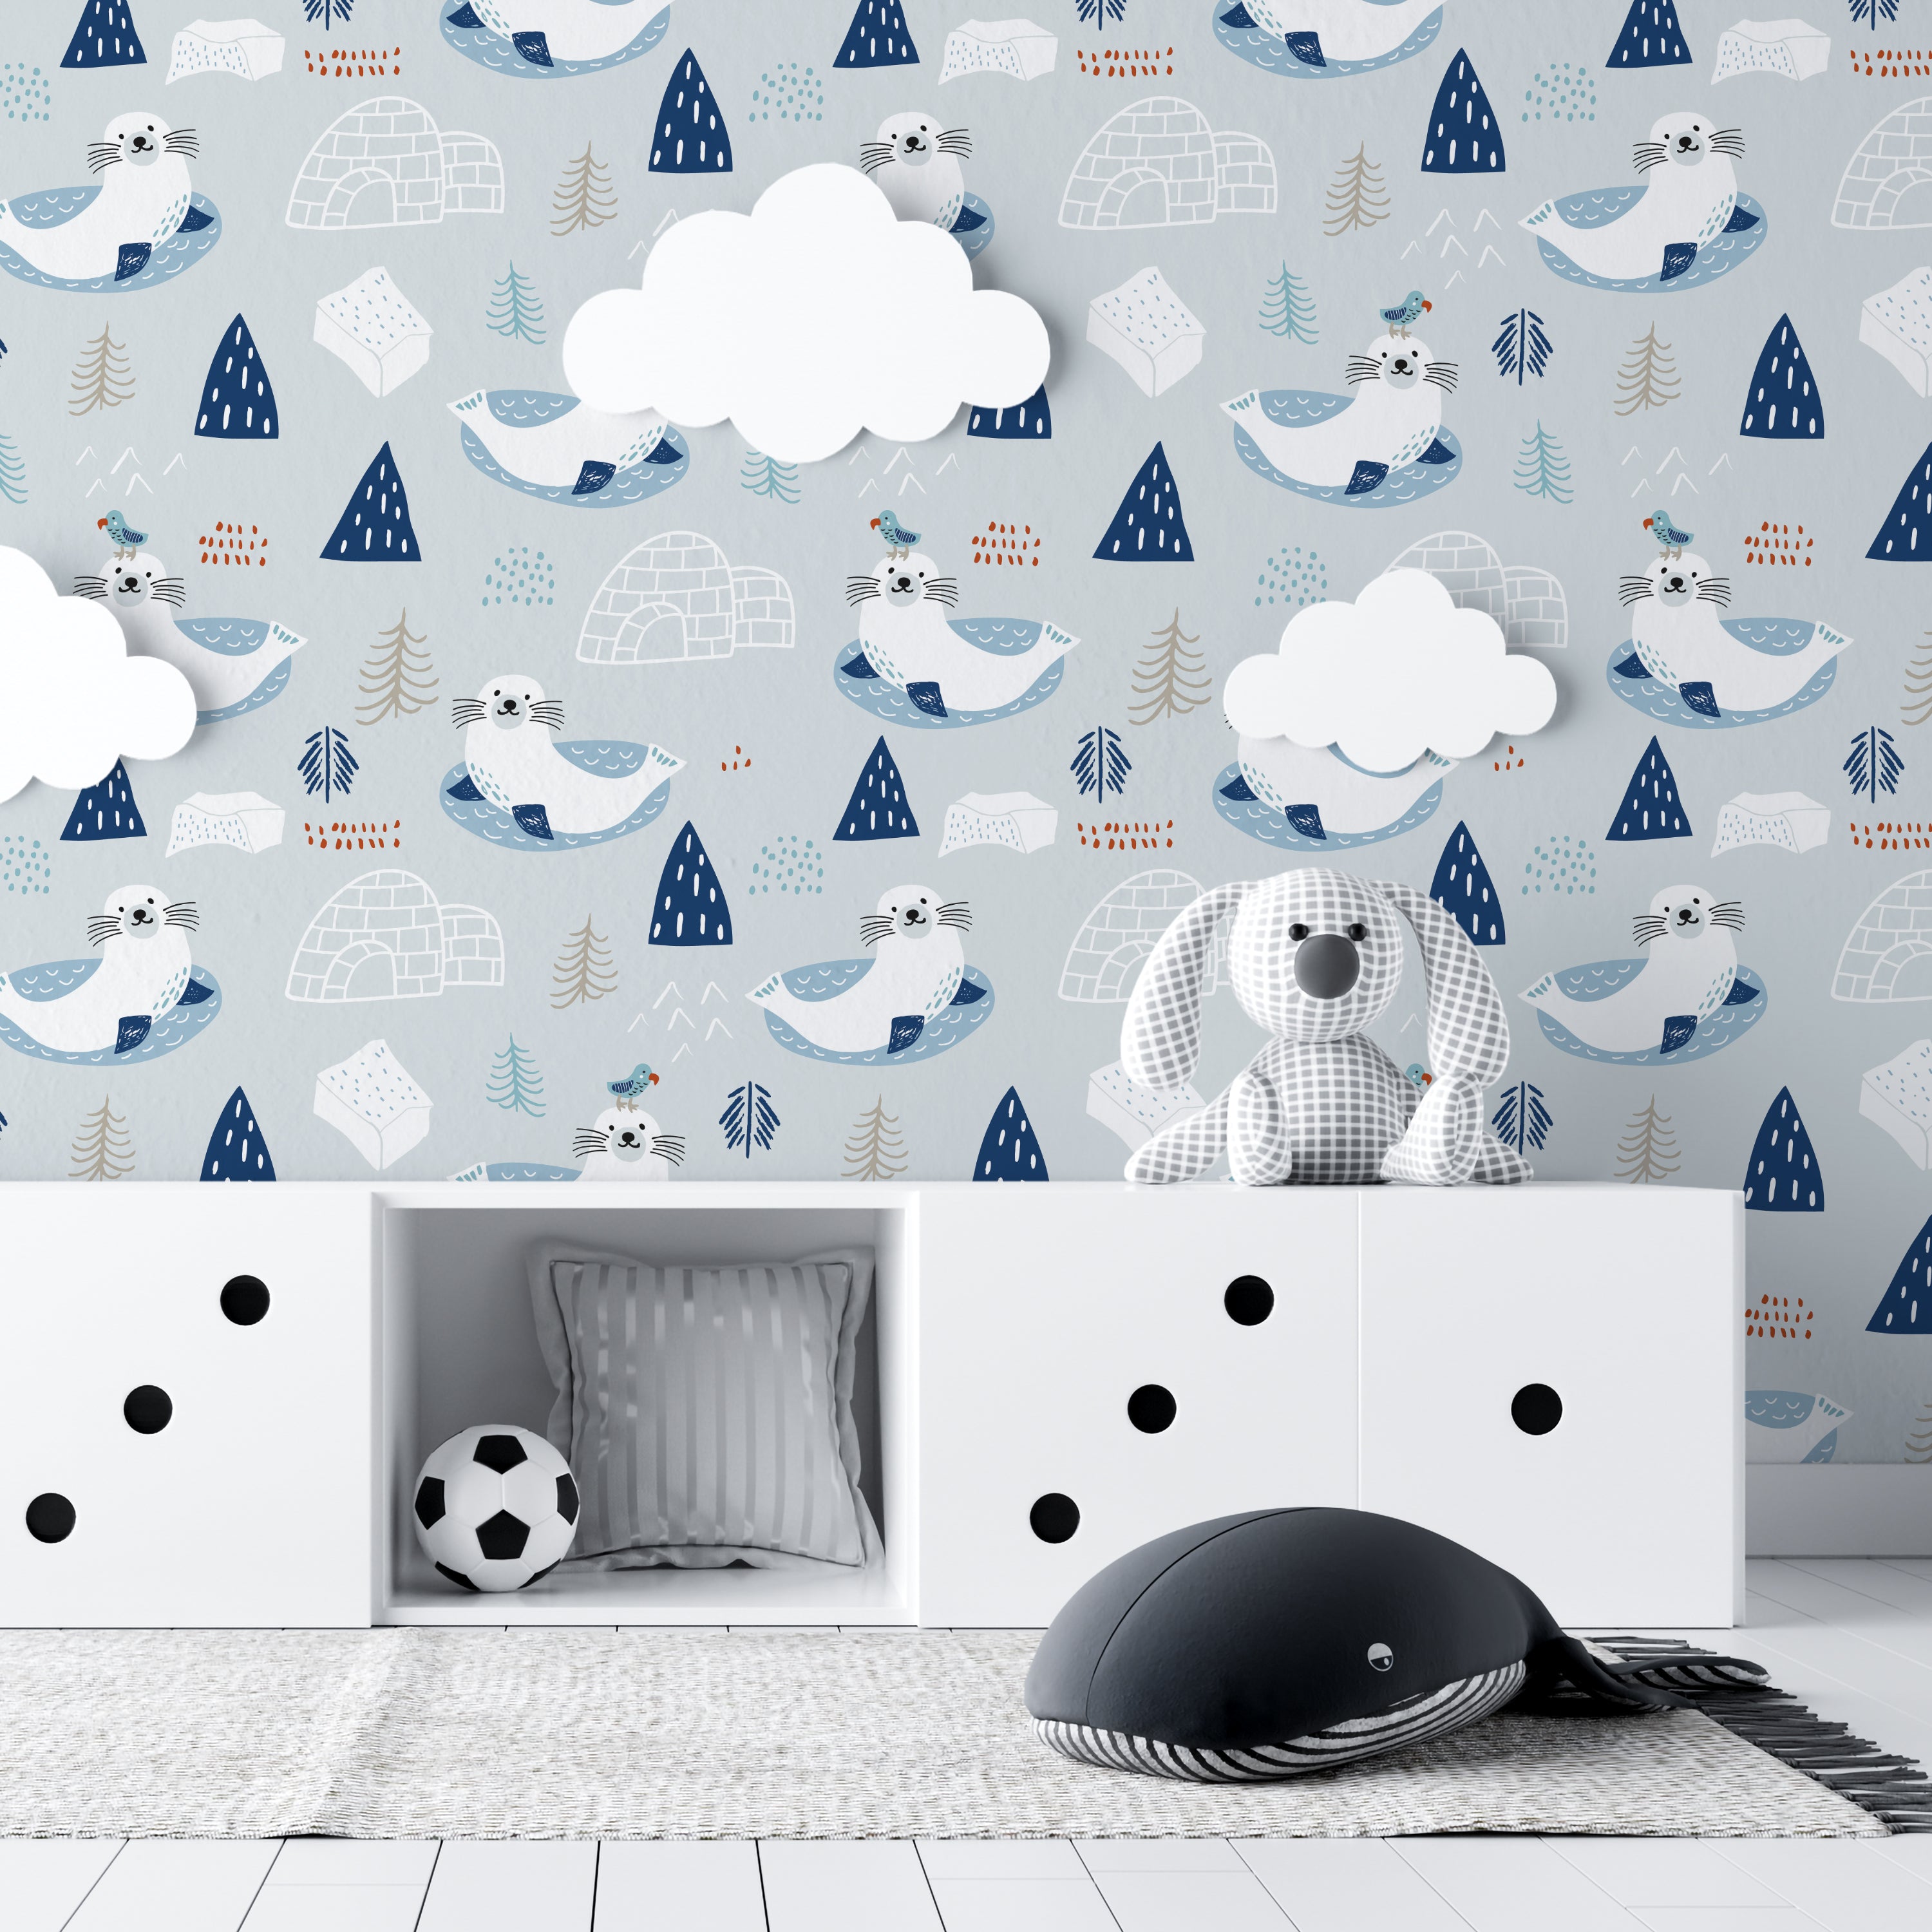 A child's room featuring the "Nordic Seal Wallpaper," where joyful seals lounging on ice floats set a playful and calm backdrop. The room includes white storage units, soft plush toys, and a cozy setting that echoes the wallpaper's serene Arctic theme.